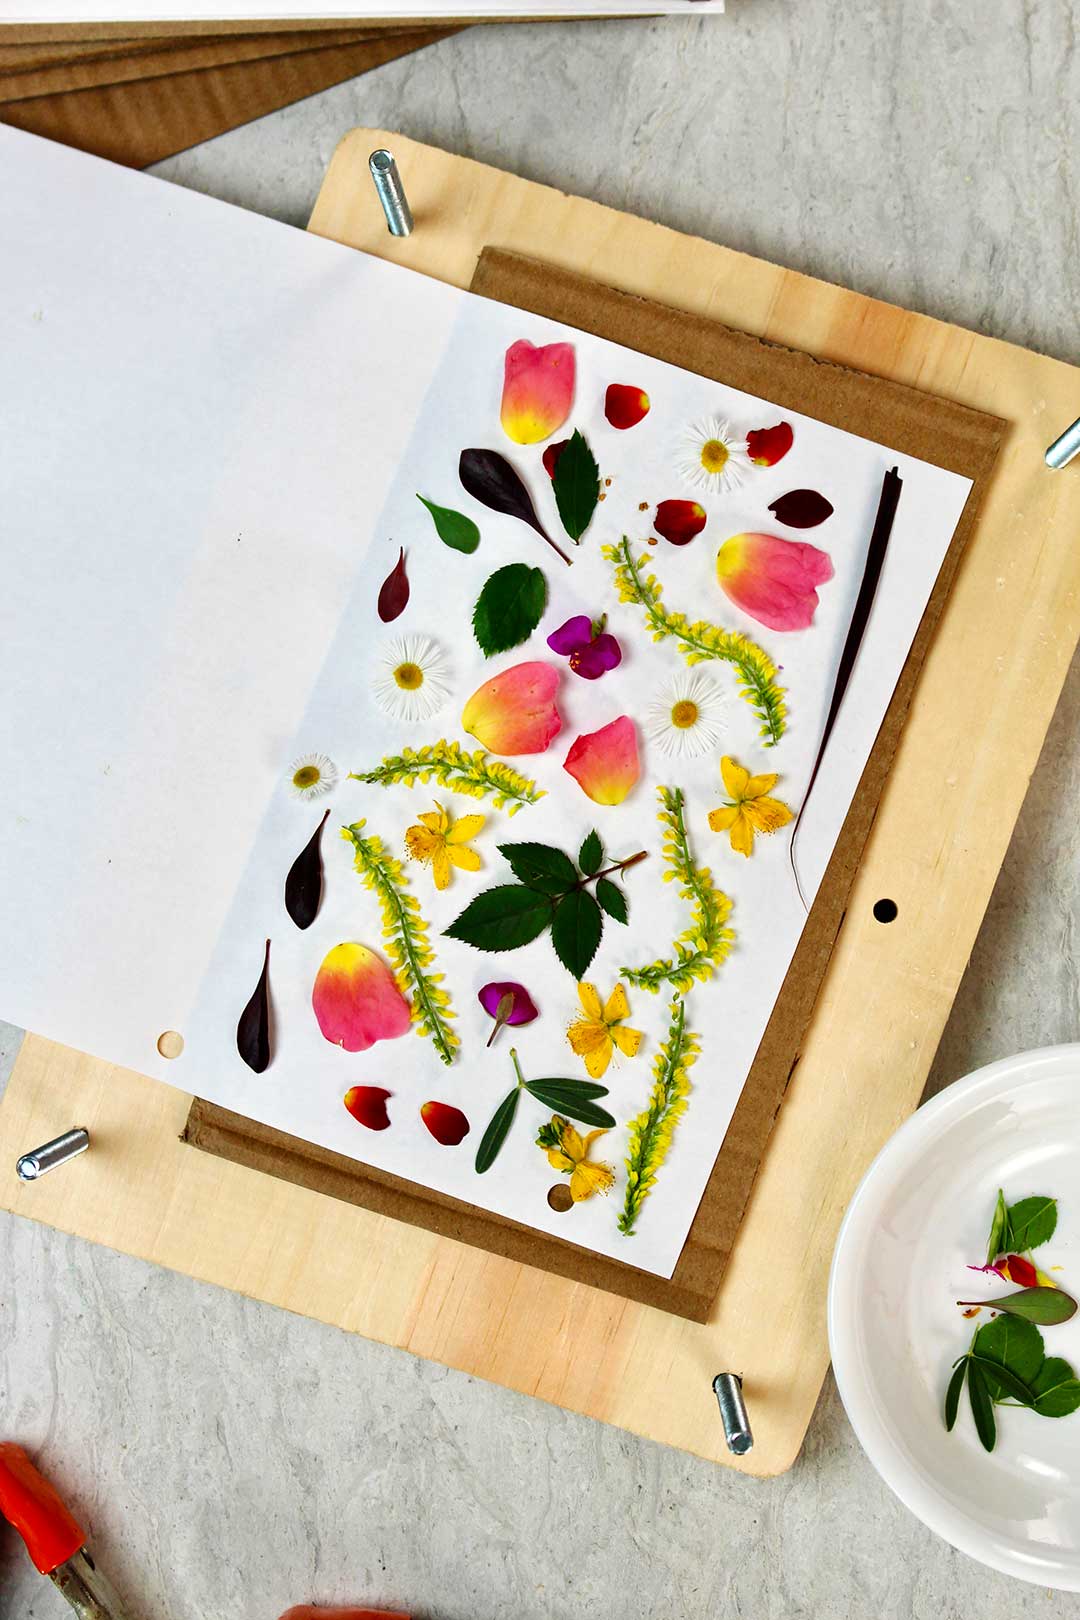 Pressed colorful flowers and leaves on white piece of paper rests inside rectangular wood block.